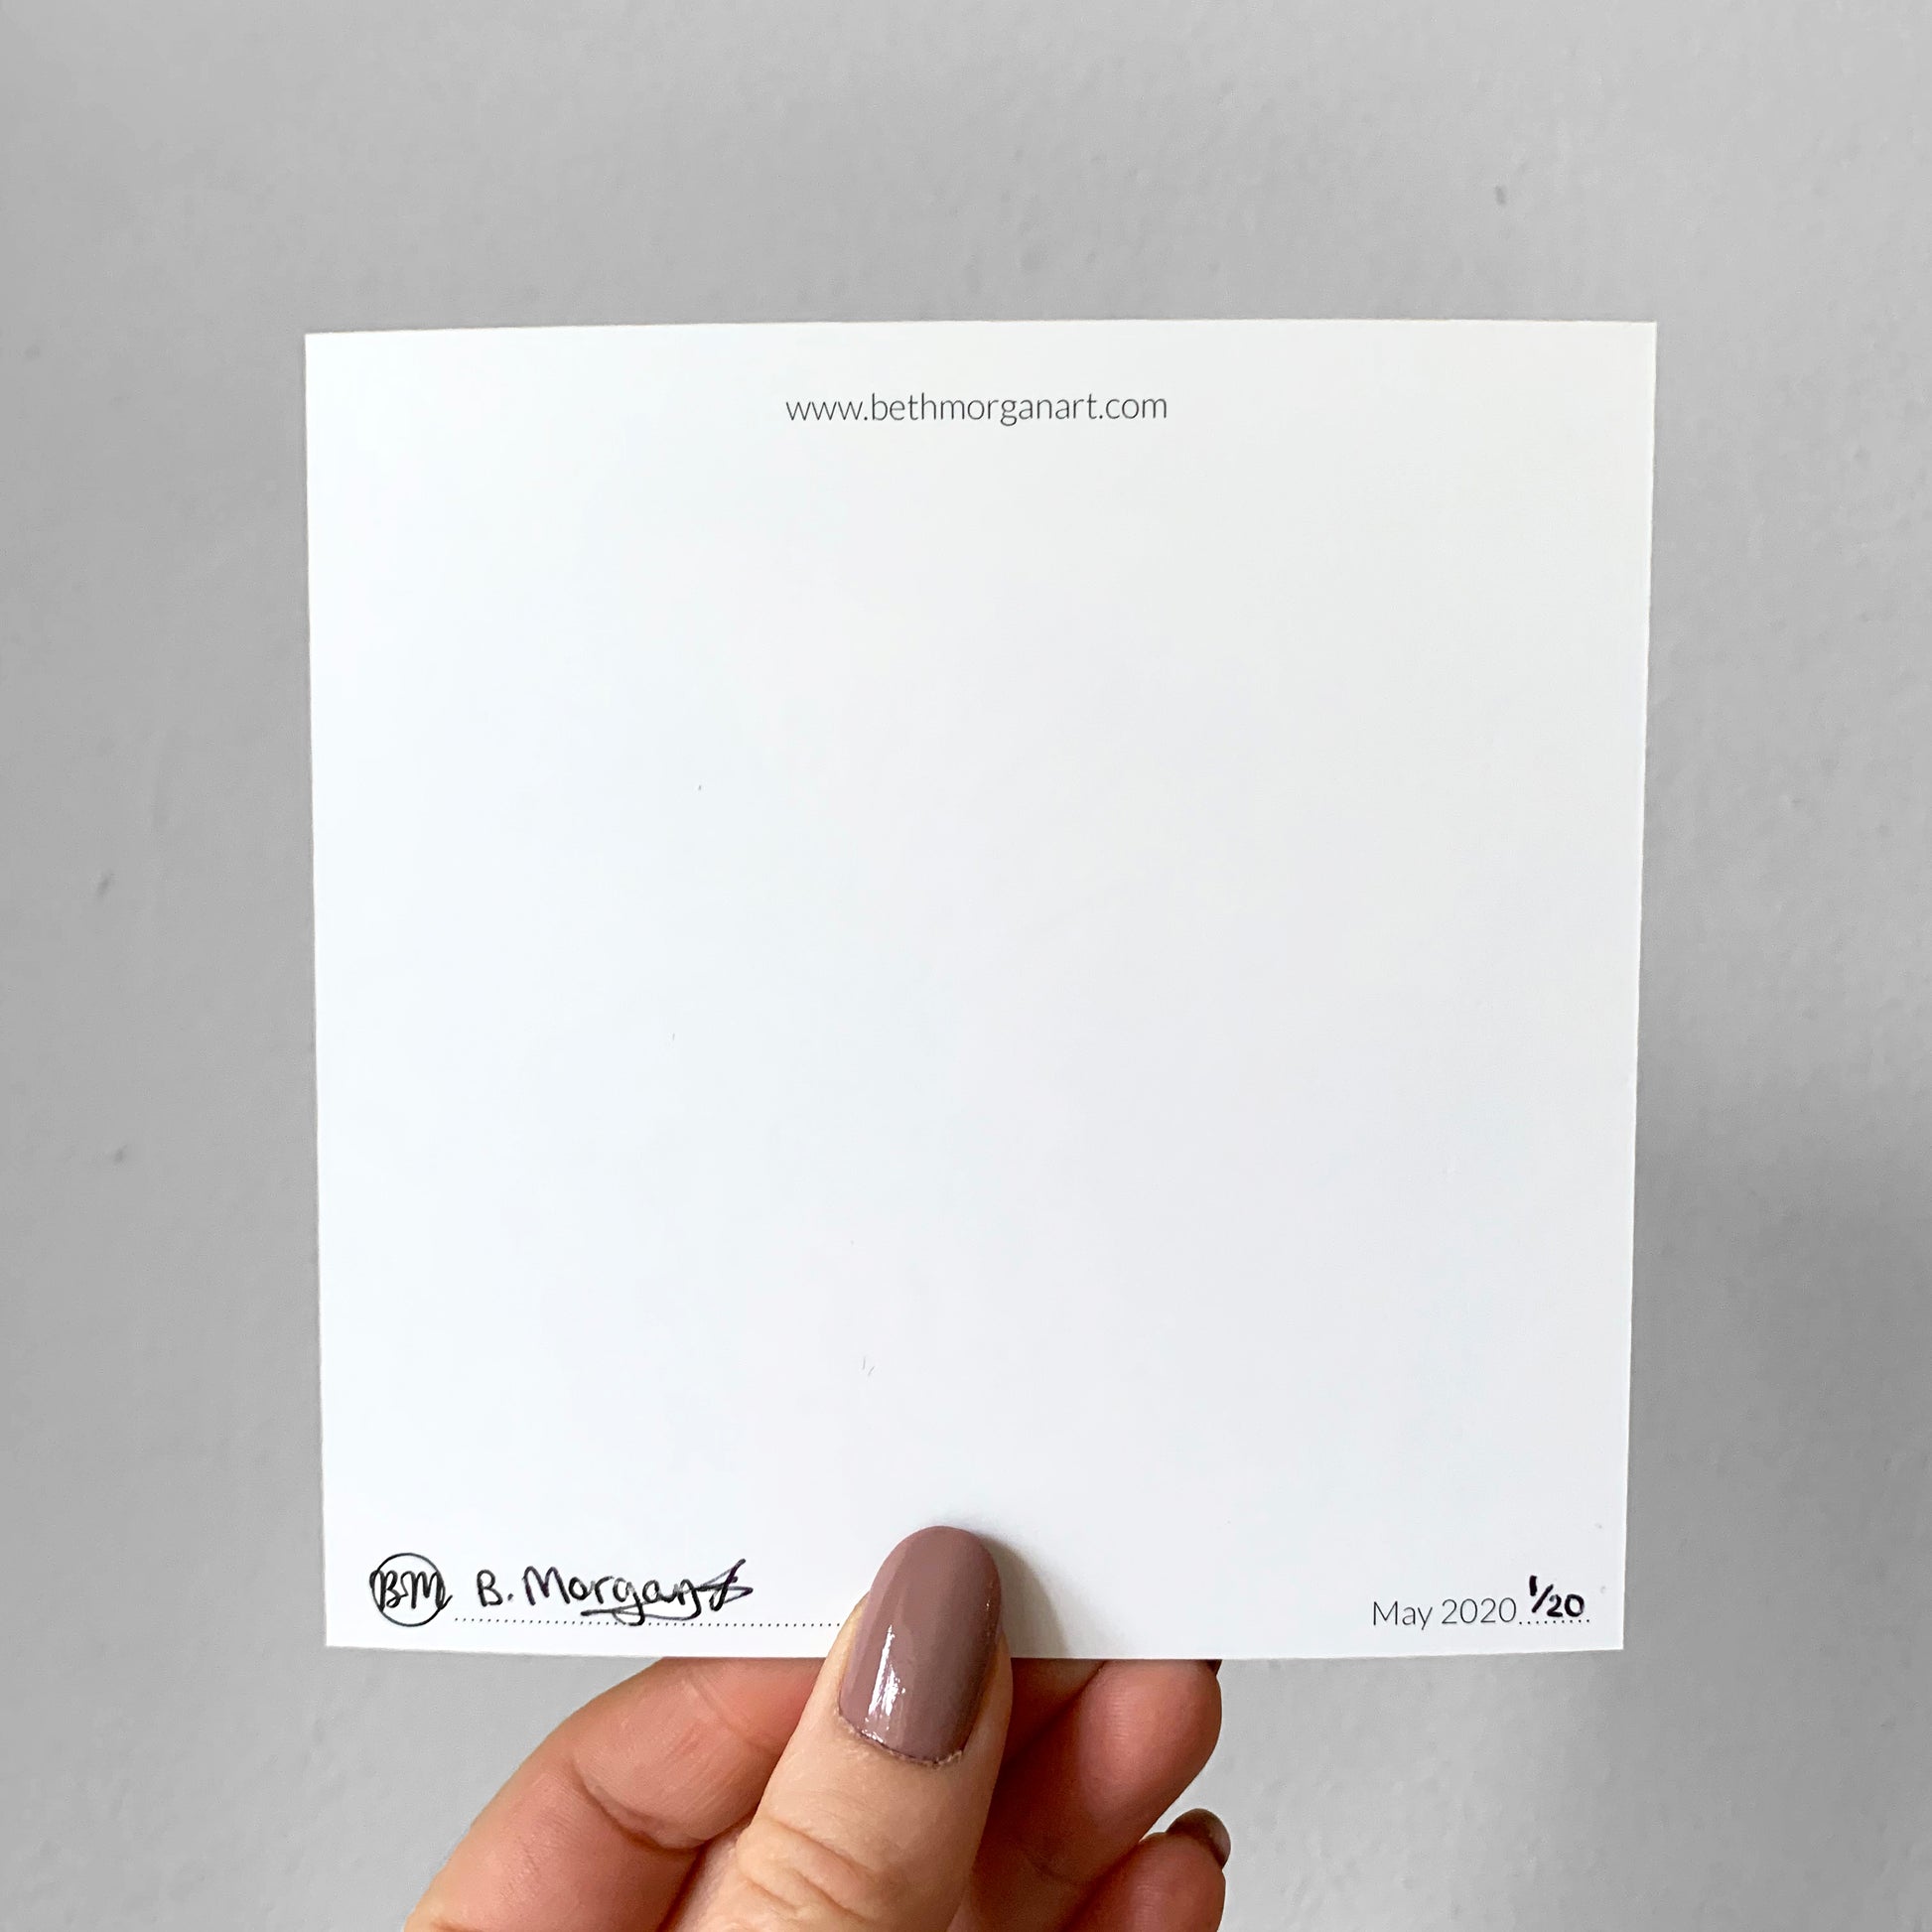 A hand holding a white square print which has been signed and numbered by Beth Morgan. It also includes a website address and a logo.